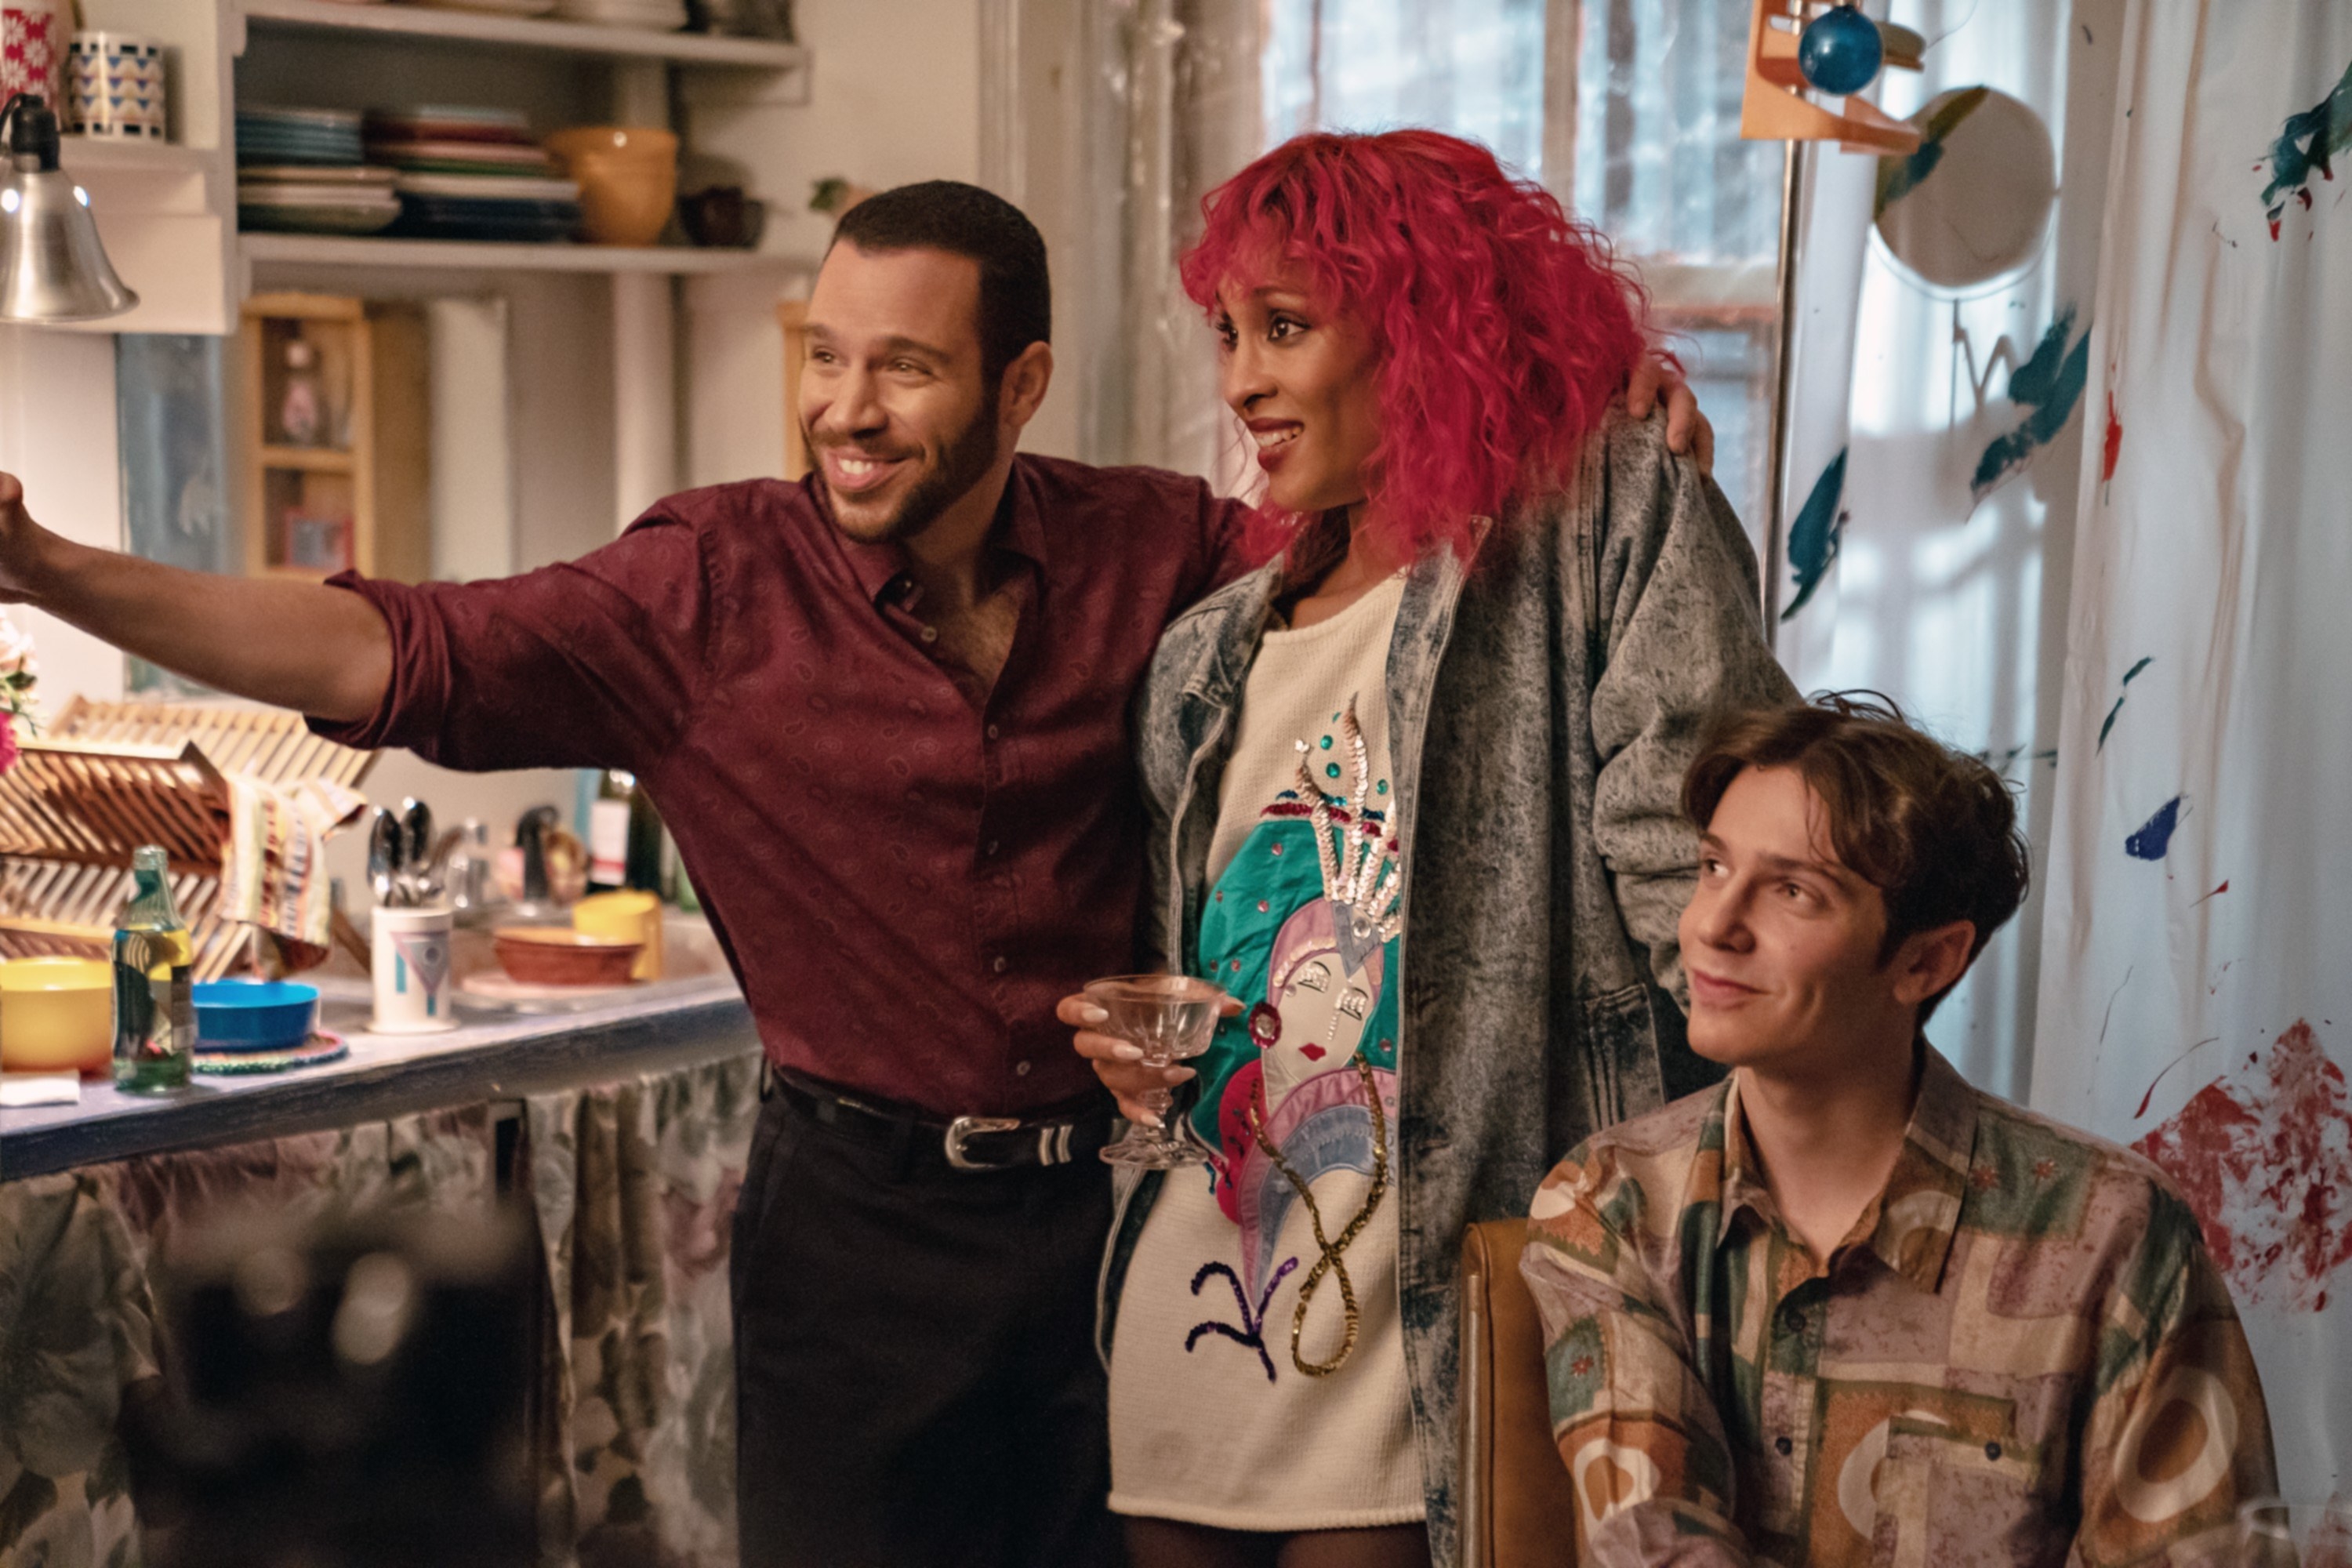 Robin de Jesus, MJ Rodriguez, and Ben Ross stand in a kitchen